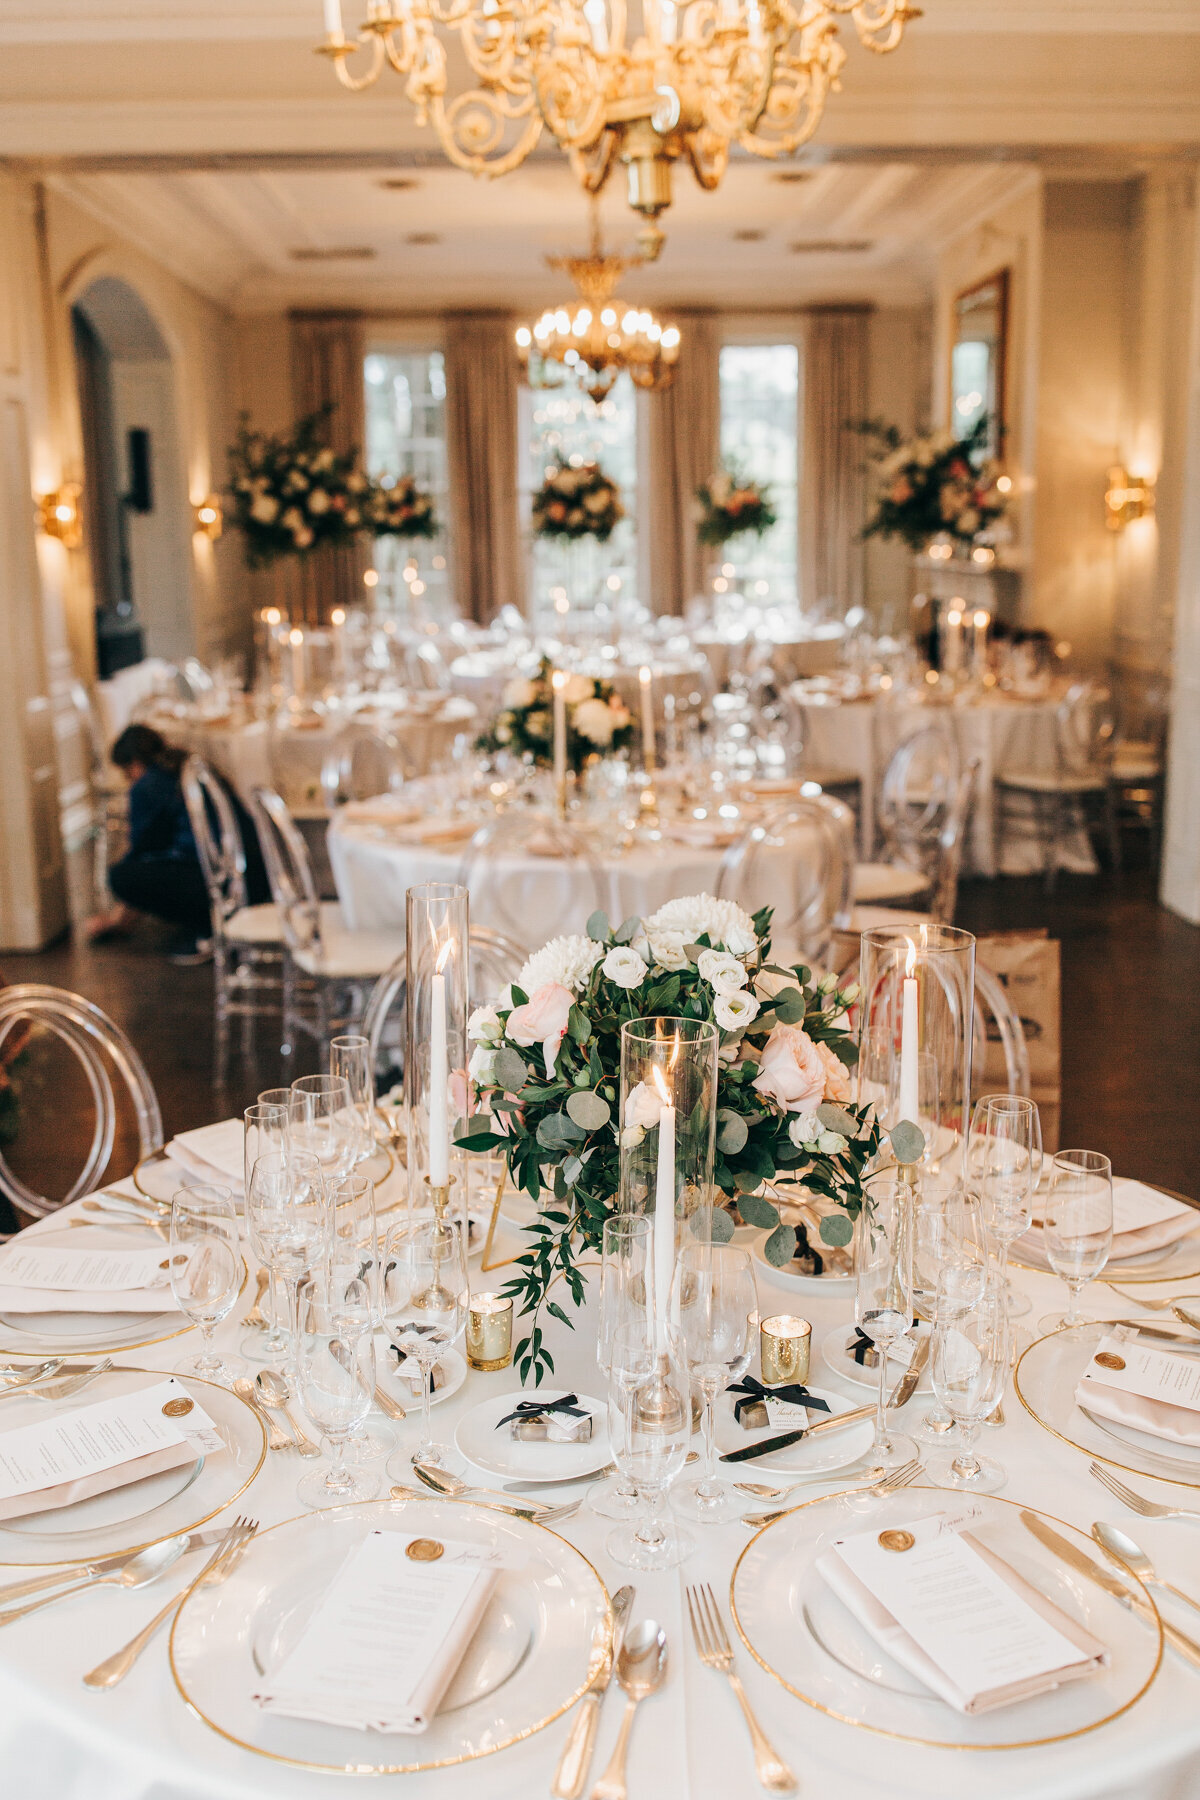 Luxurious wedding dinner with candlesticks and floral centre pieces